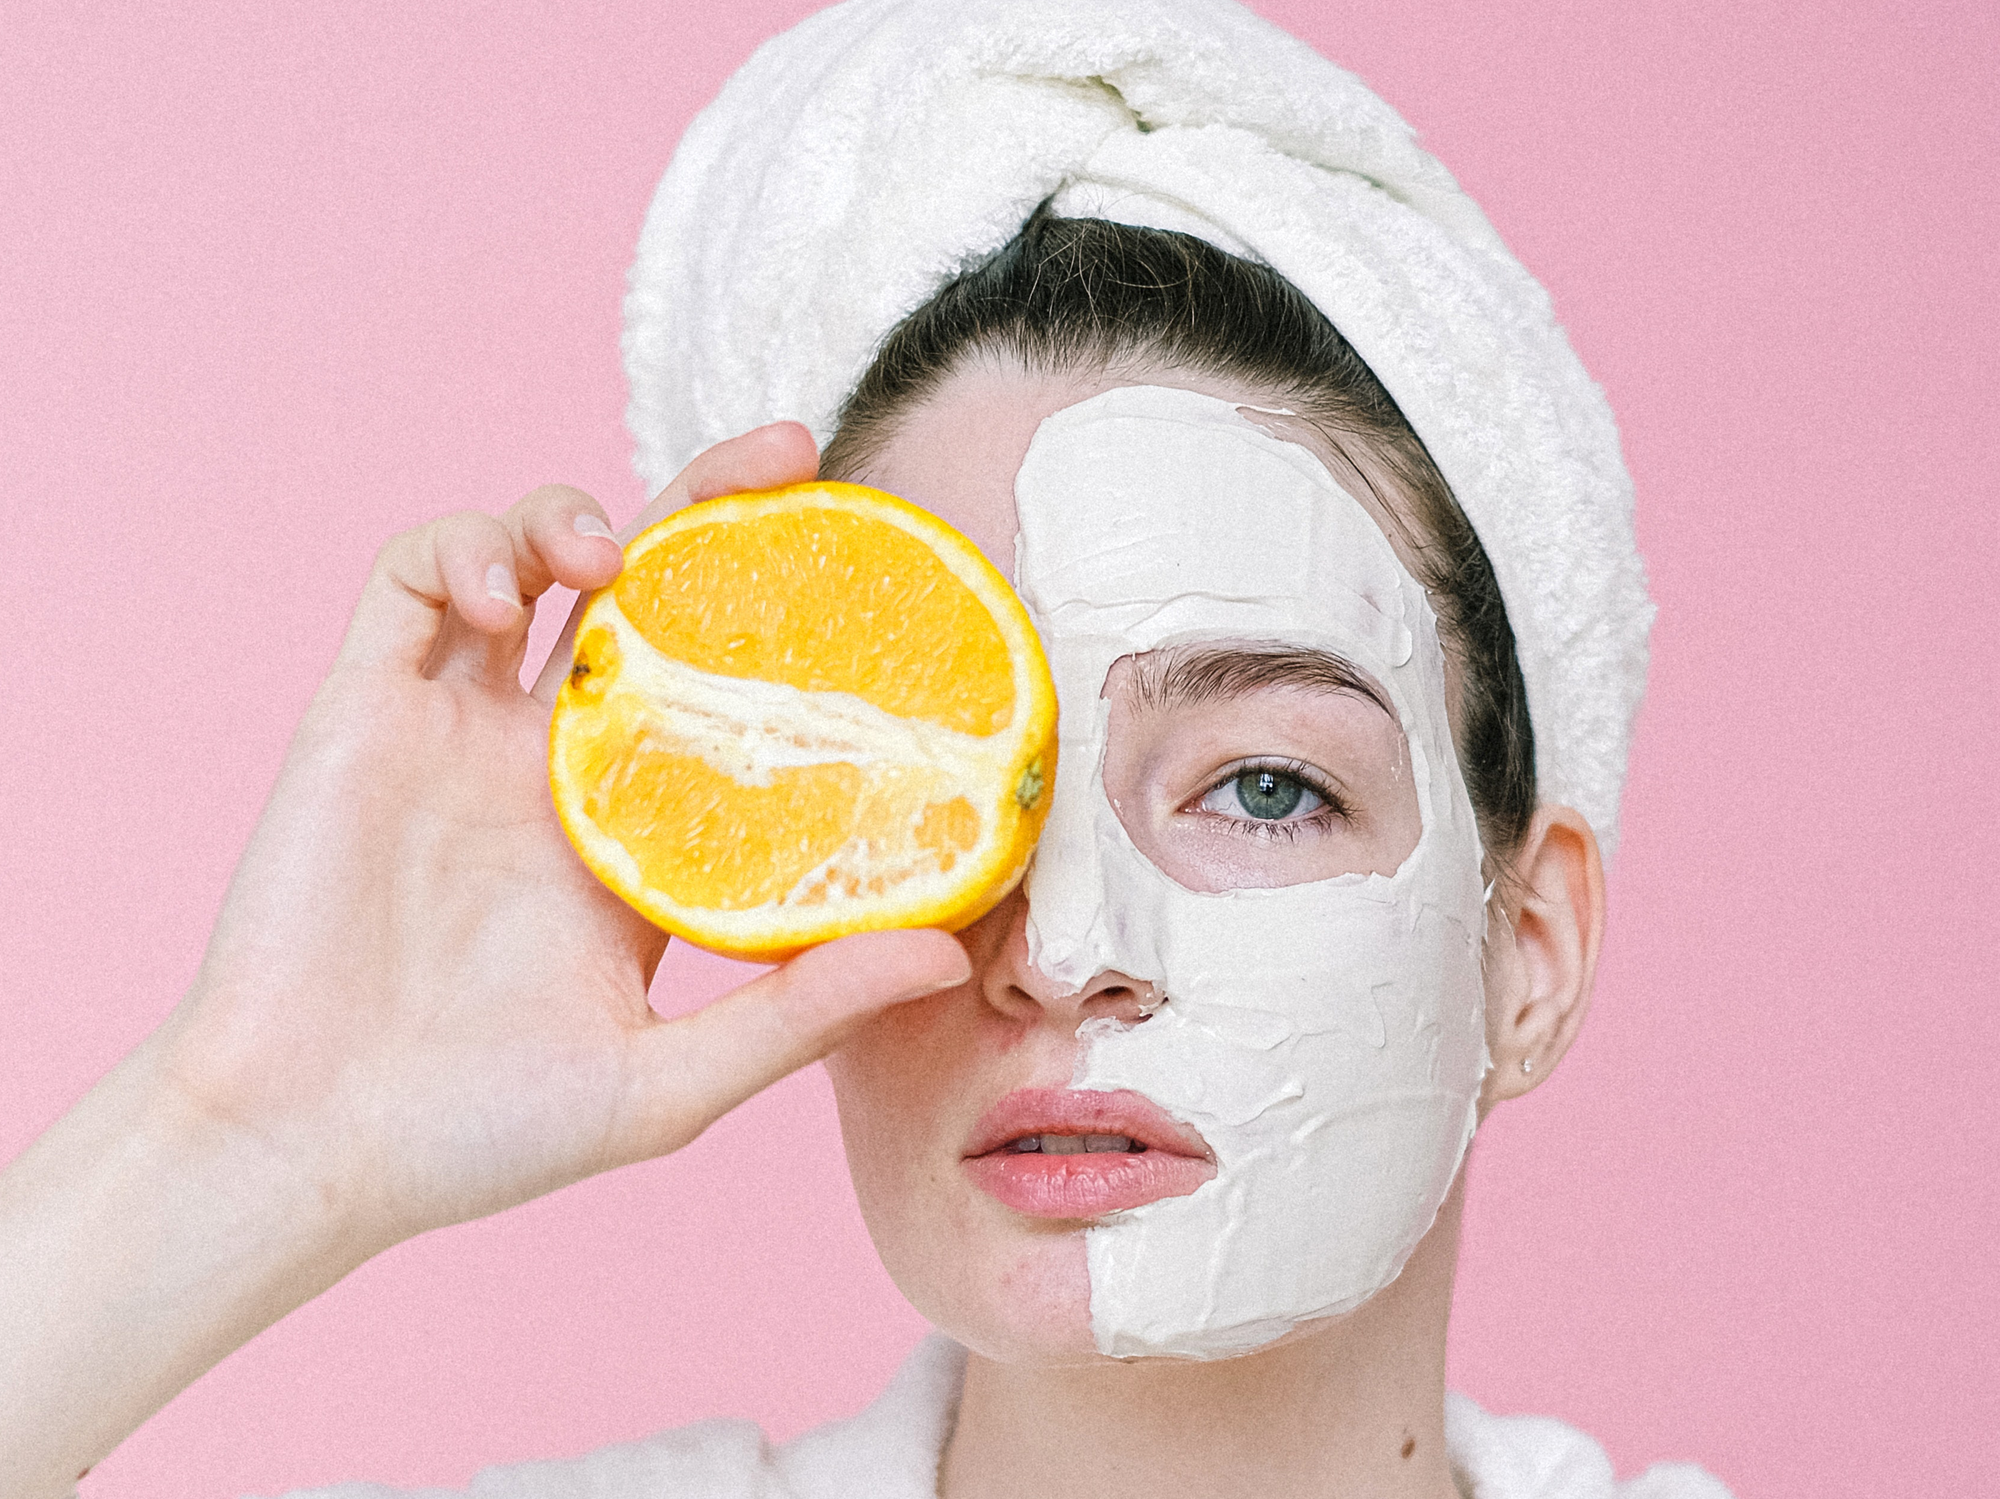 Why citrus is good for your skin and hair? We tell you here!